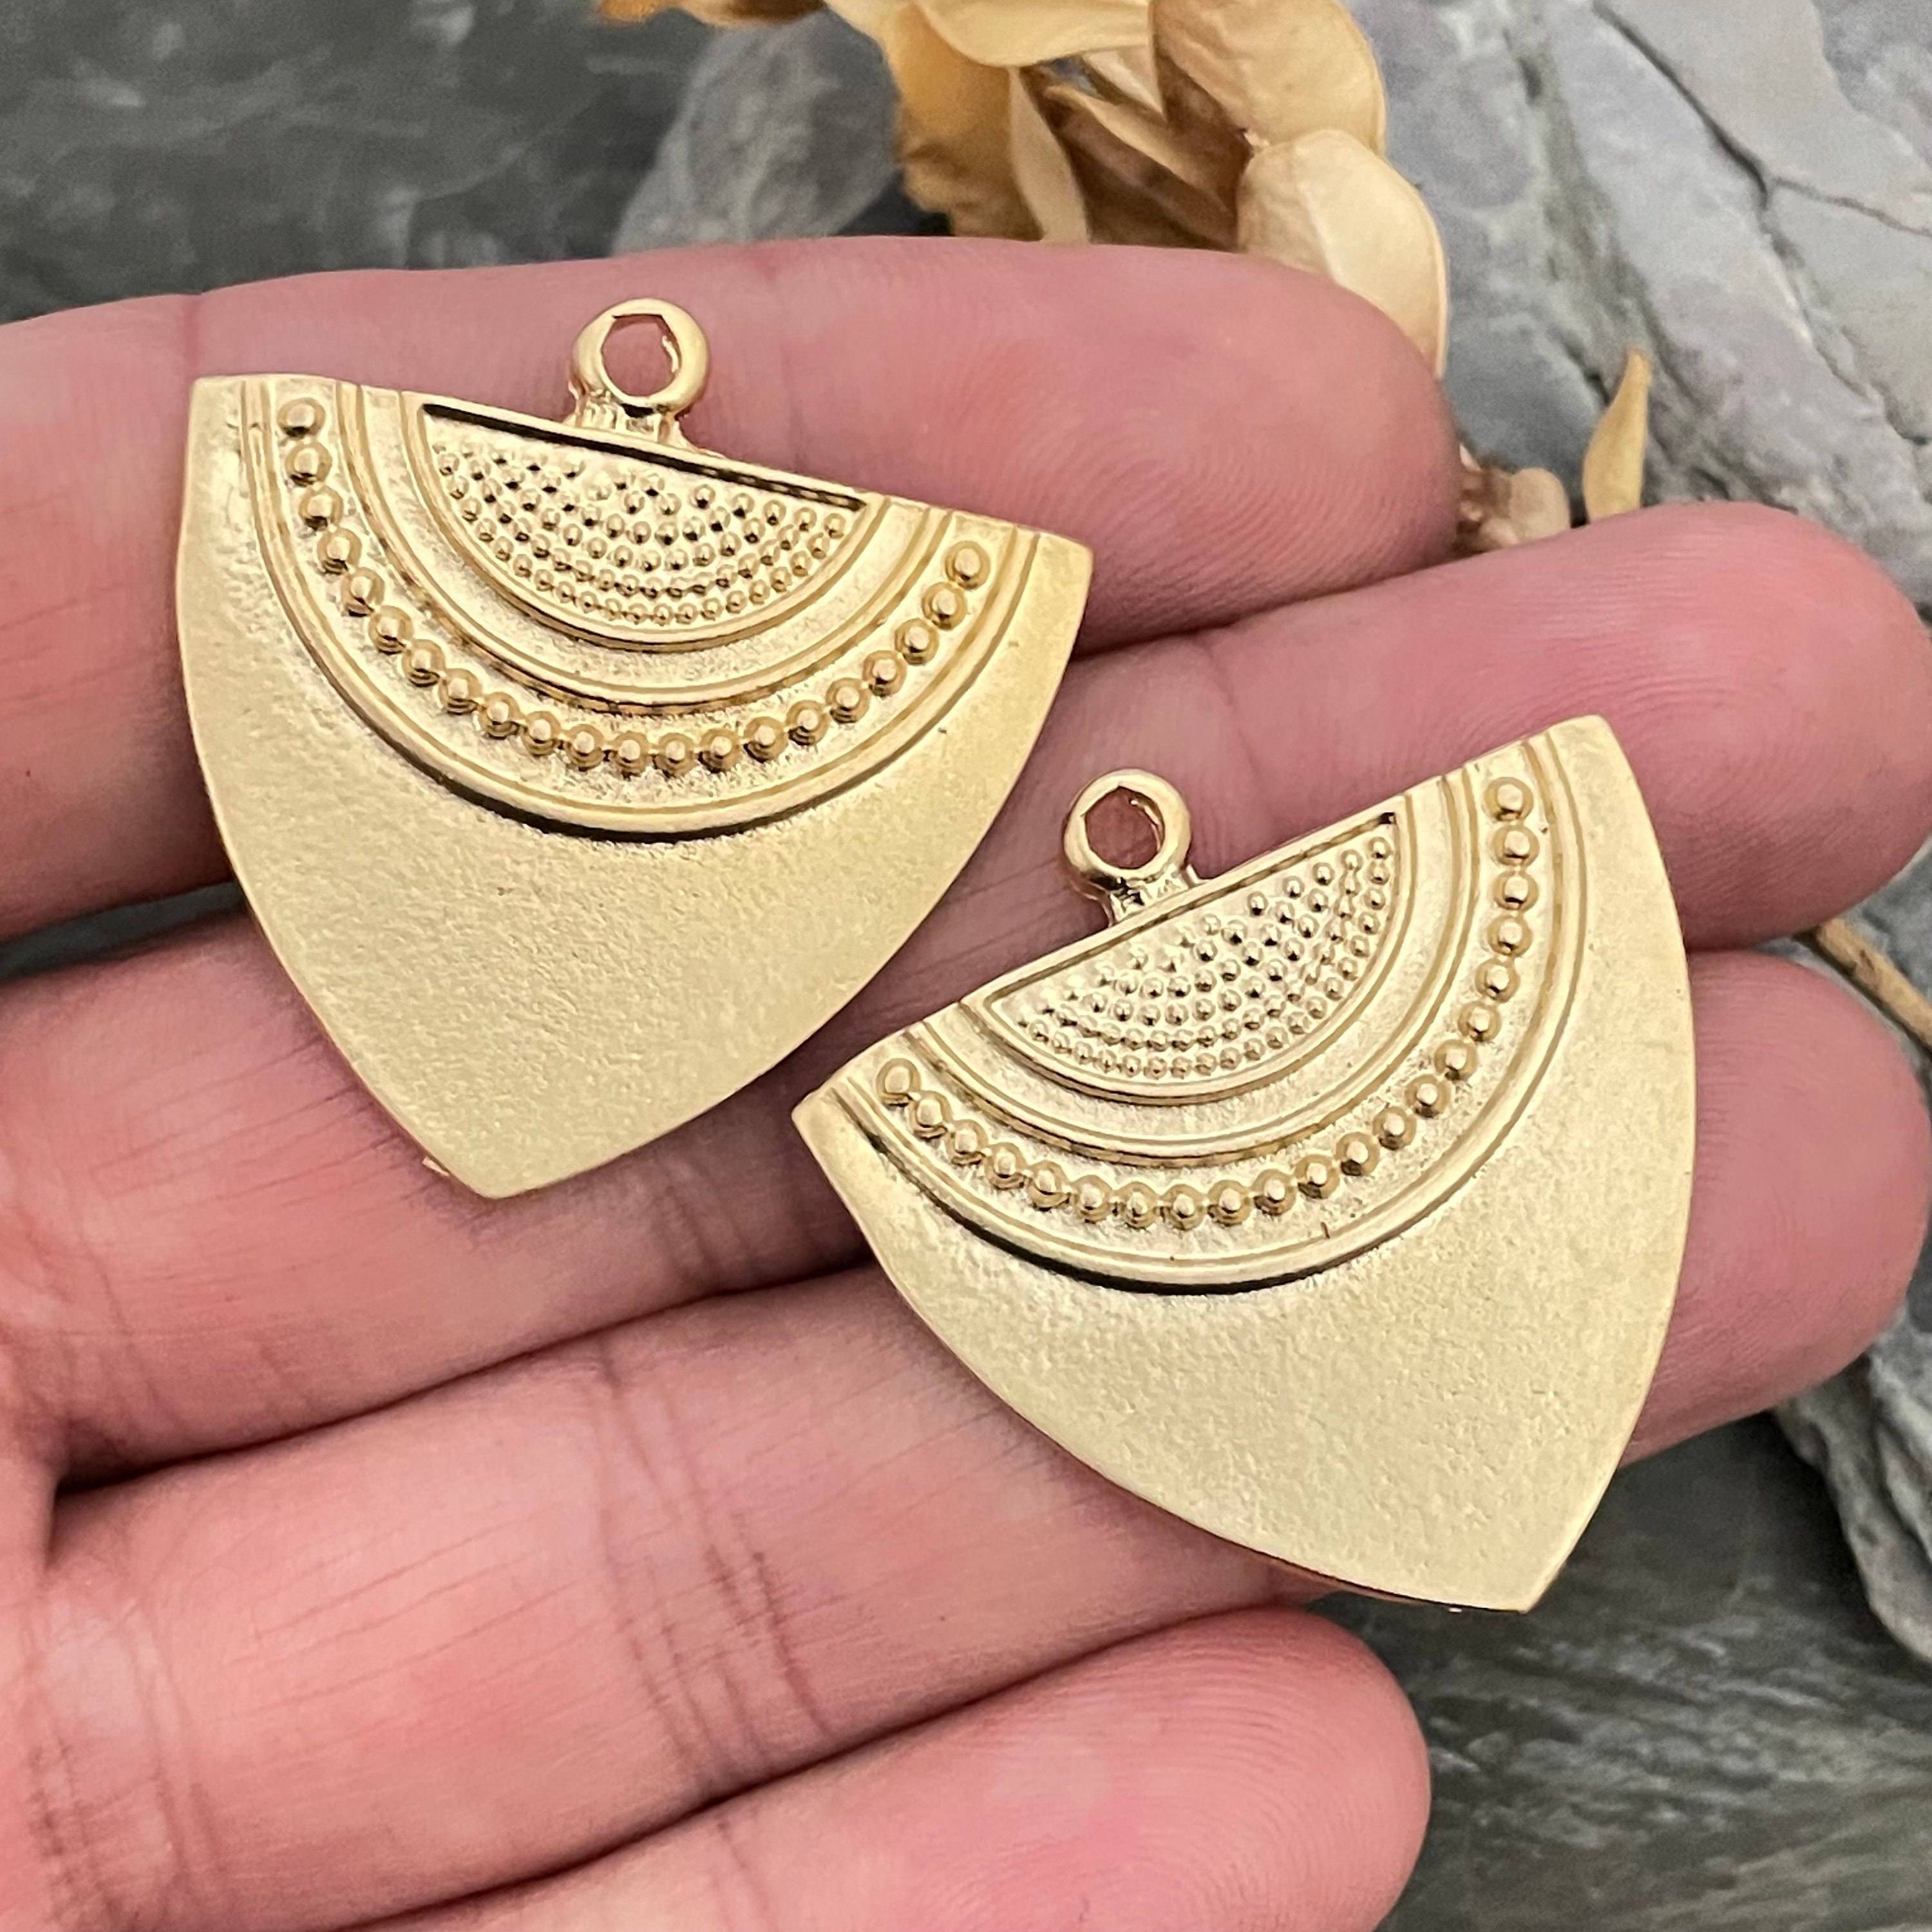 2 Pieces U Shape Geometric Charms for Jewelry Making - Laser Cut